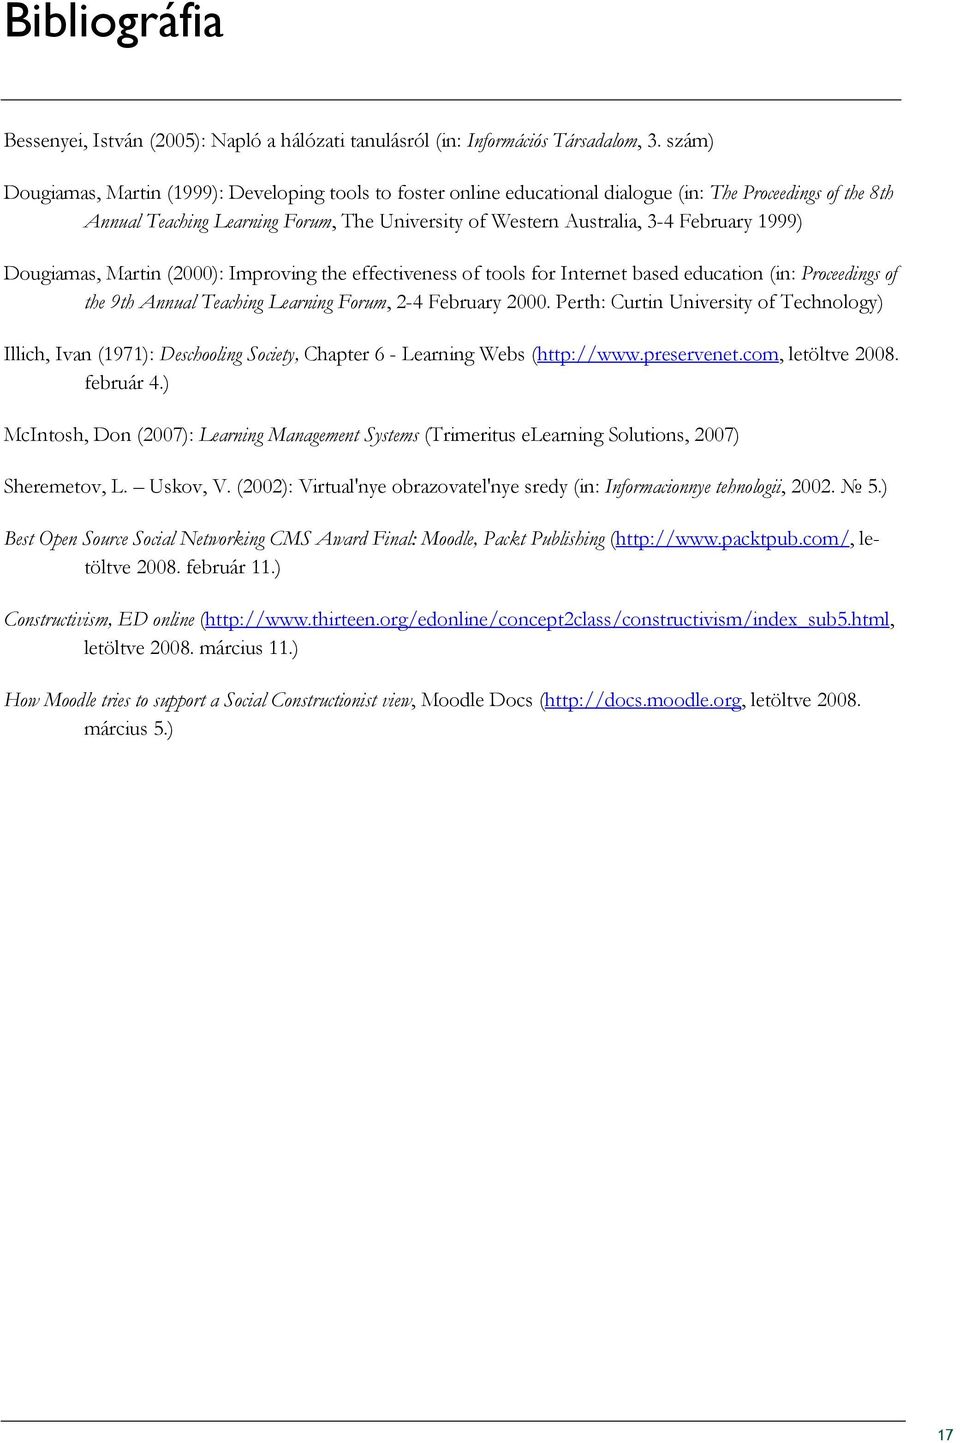 February 1999) Dougiamas, Martin (2000): Improving the effectiveness of tools for Internet based education (in: Proceedings of the 9th Annual Teaching Learning Forum, 2-4 February 2000.